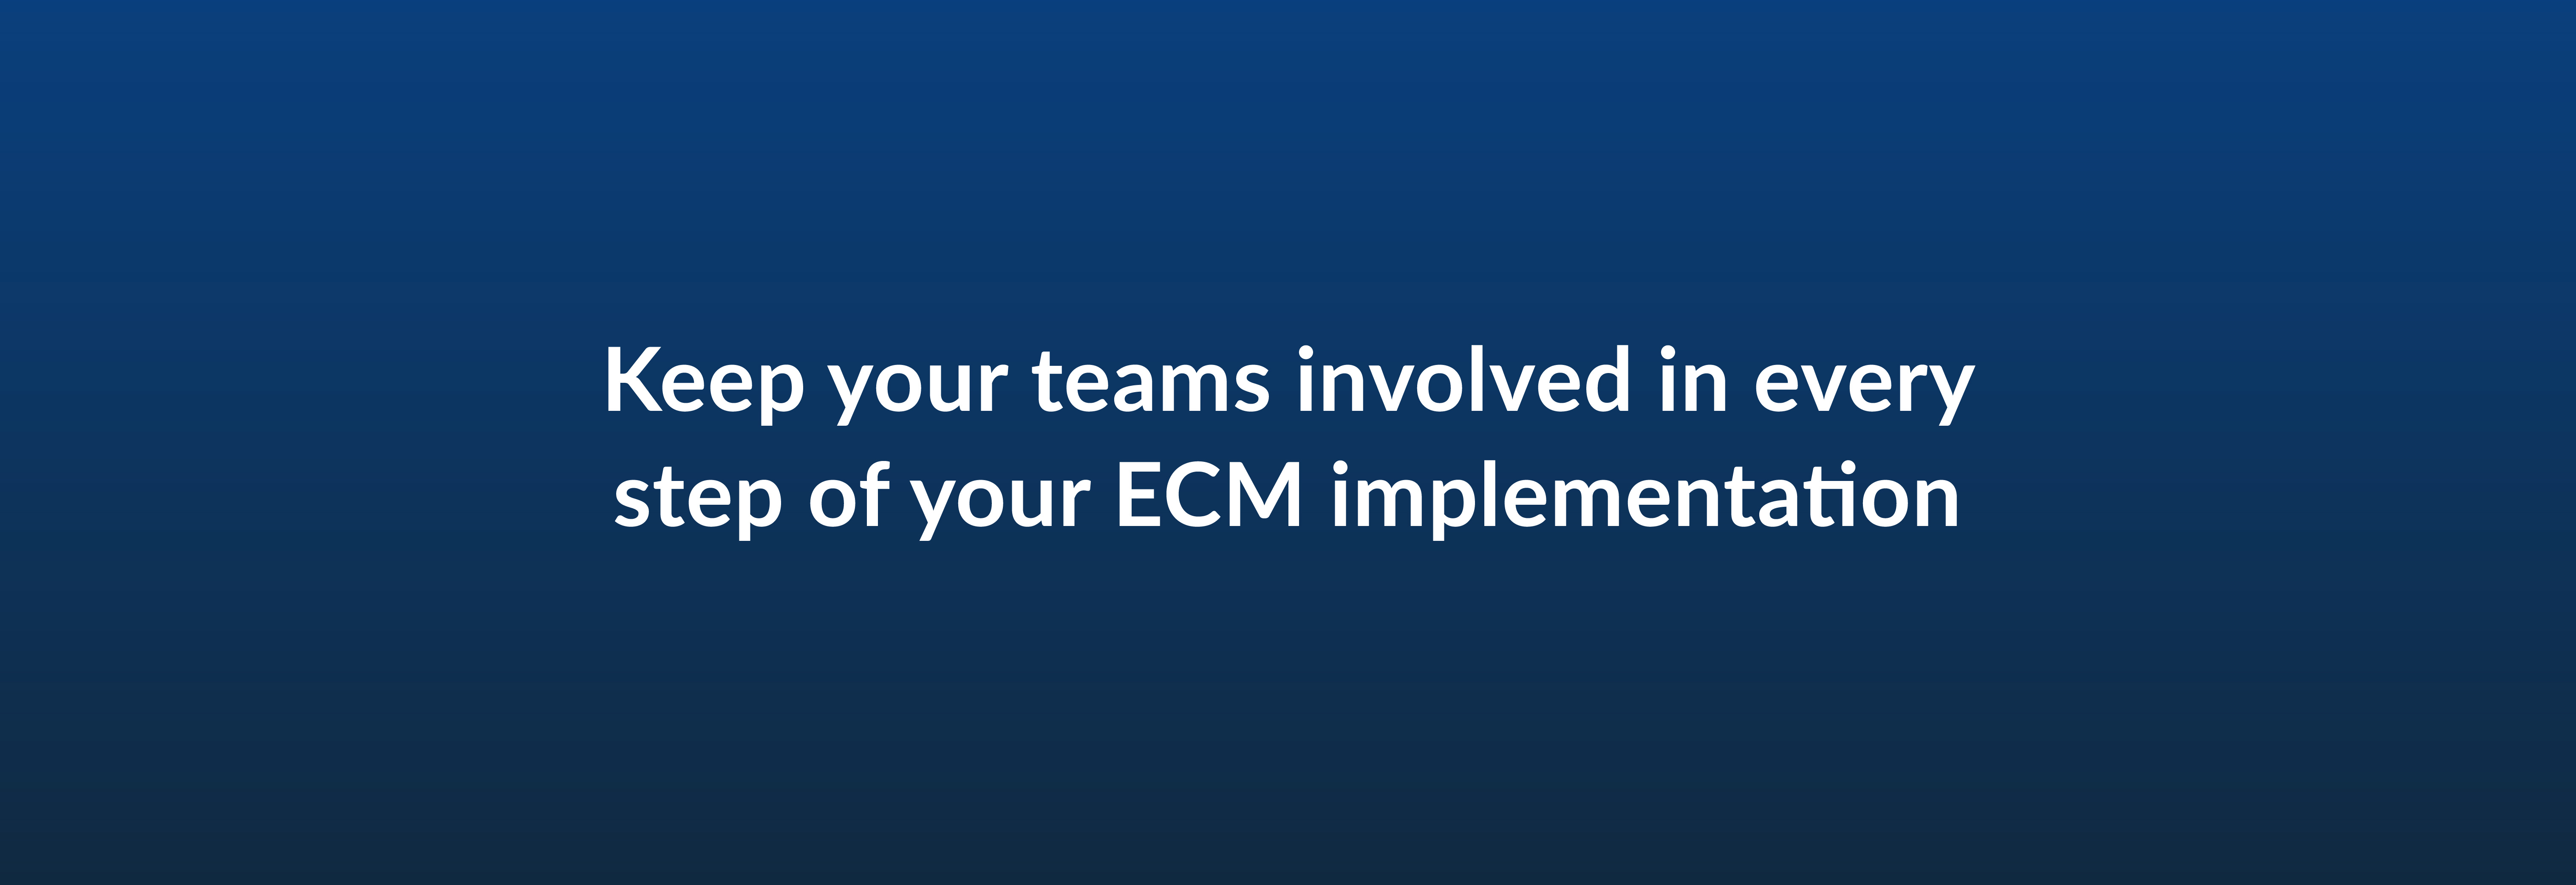 Keep your team involved in every step of your ECM implementation